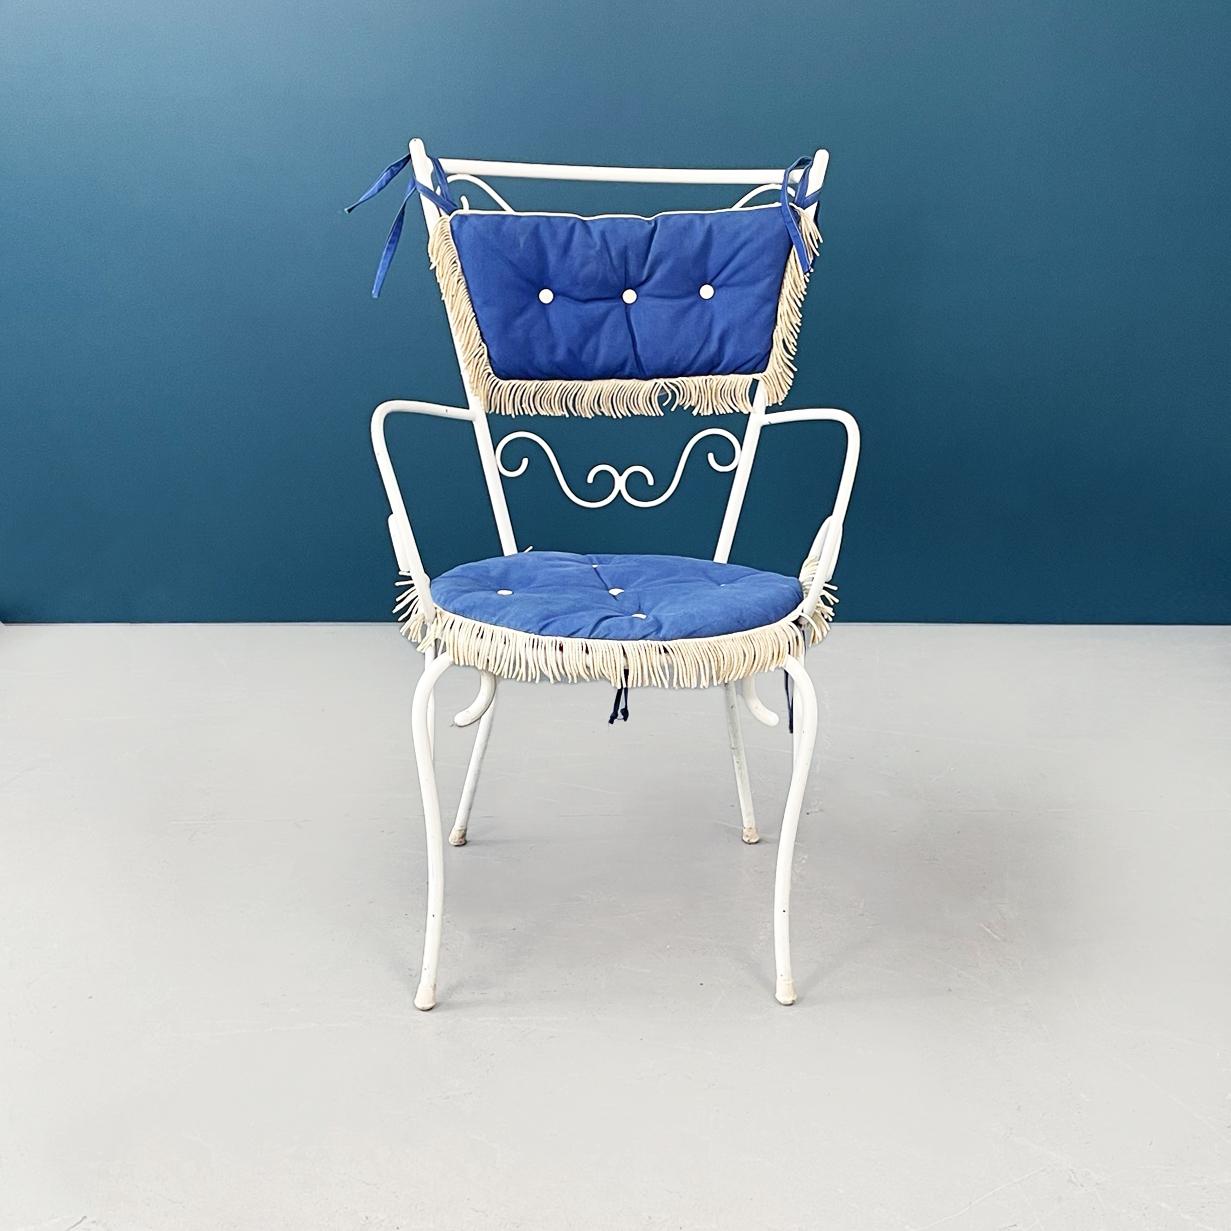 Mid-Century Modern Italian Mid-Century Garden Chairs in White Wrought Iron and Fabric, 1960s For Sale